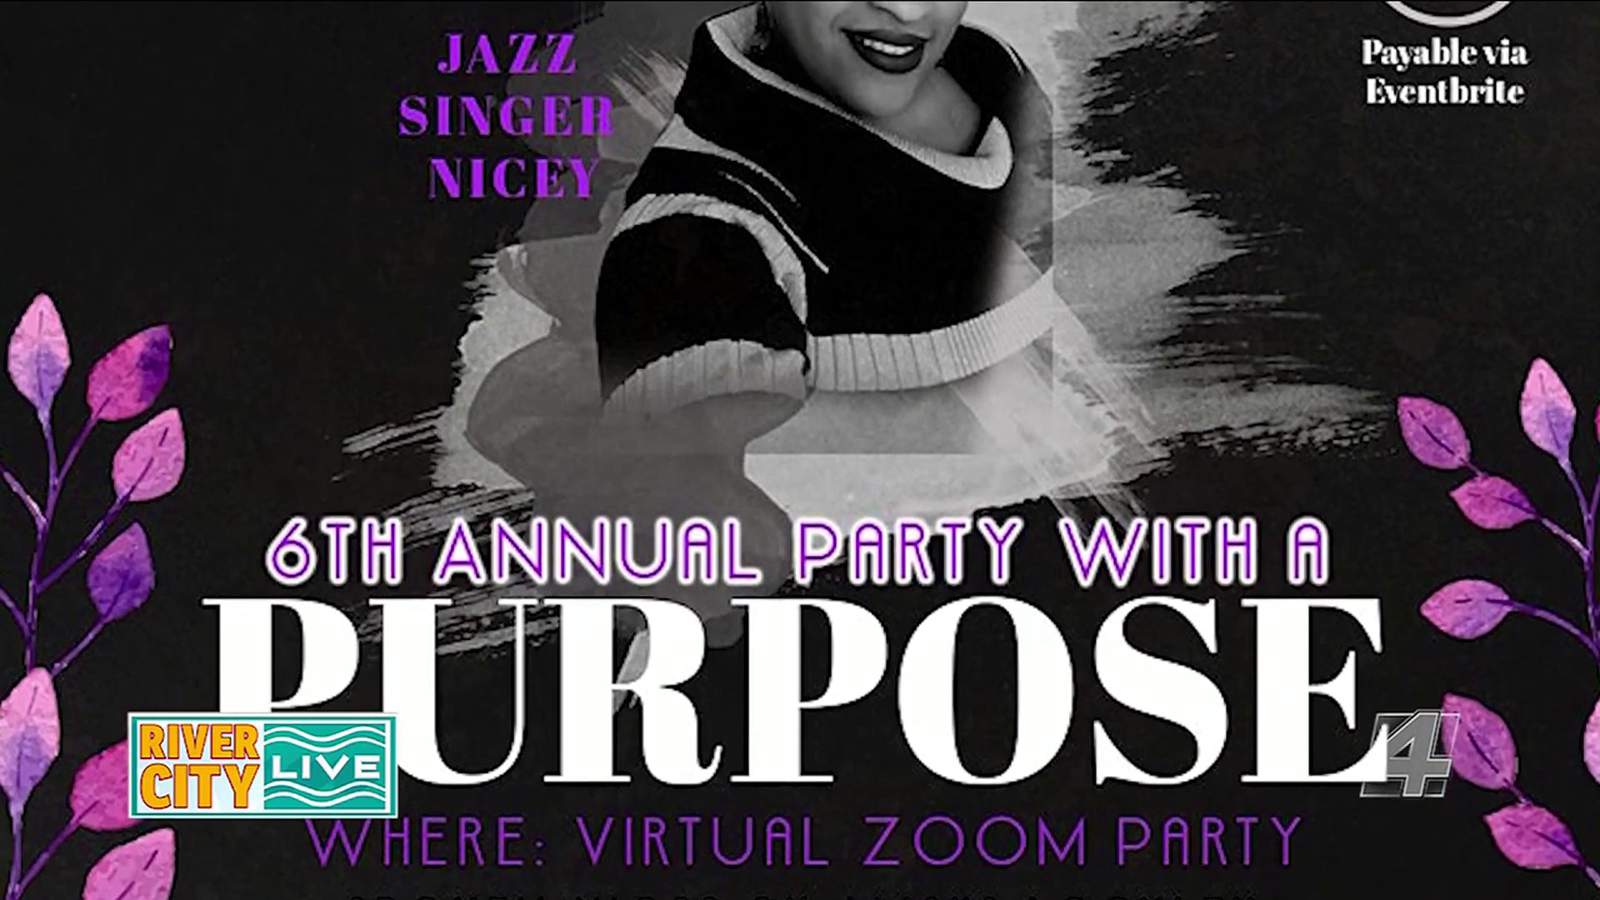 Party with A Purpose | River City Live